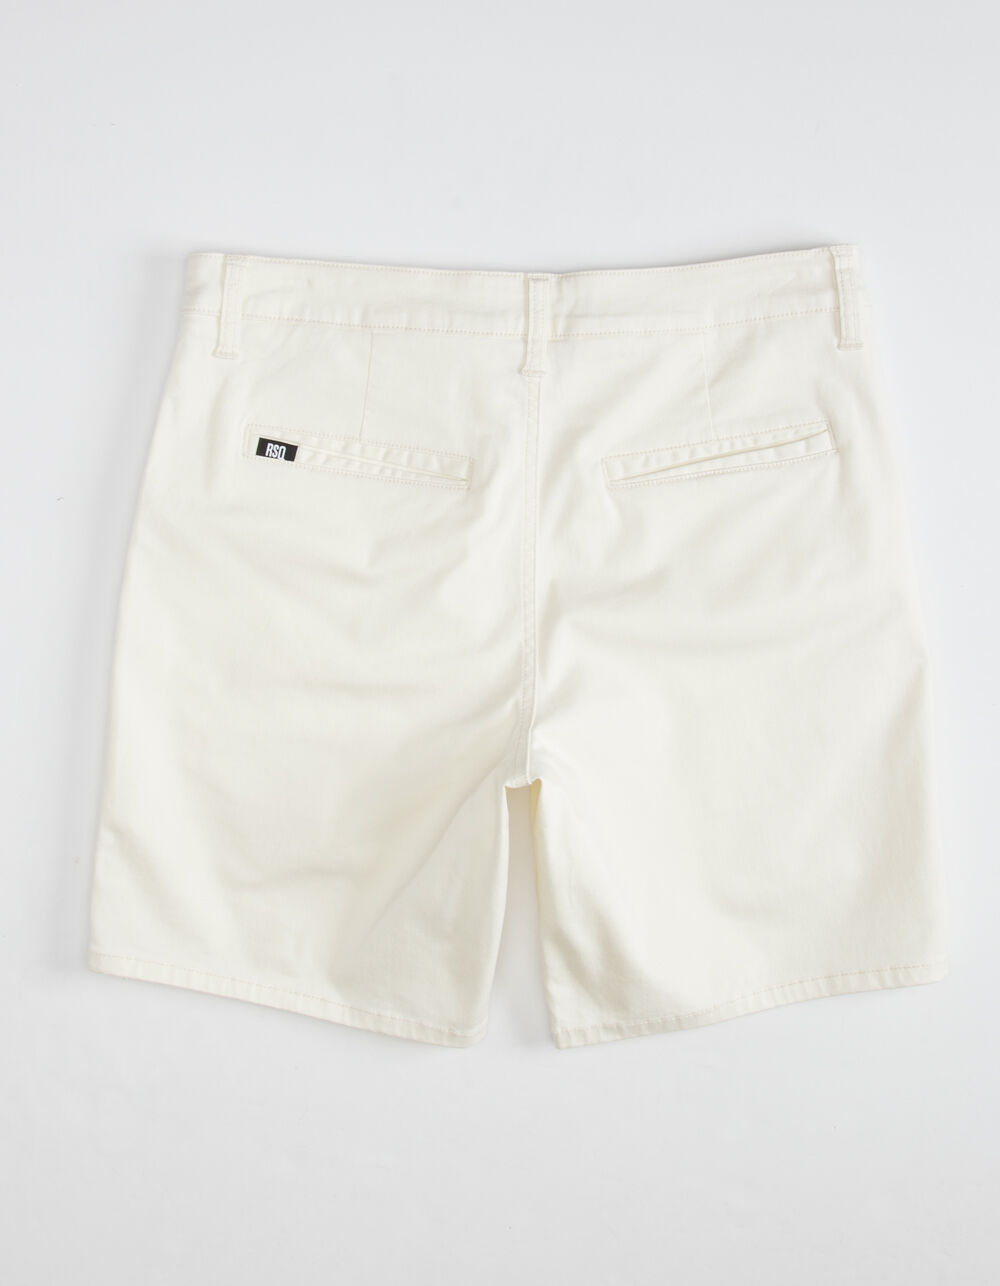 RSQ Short Mens White Chino Shorts image number 5